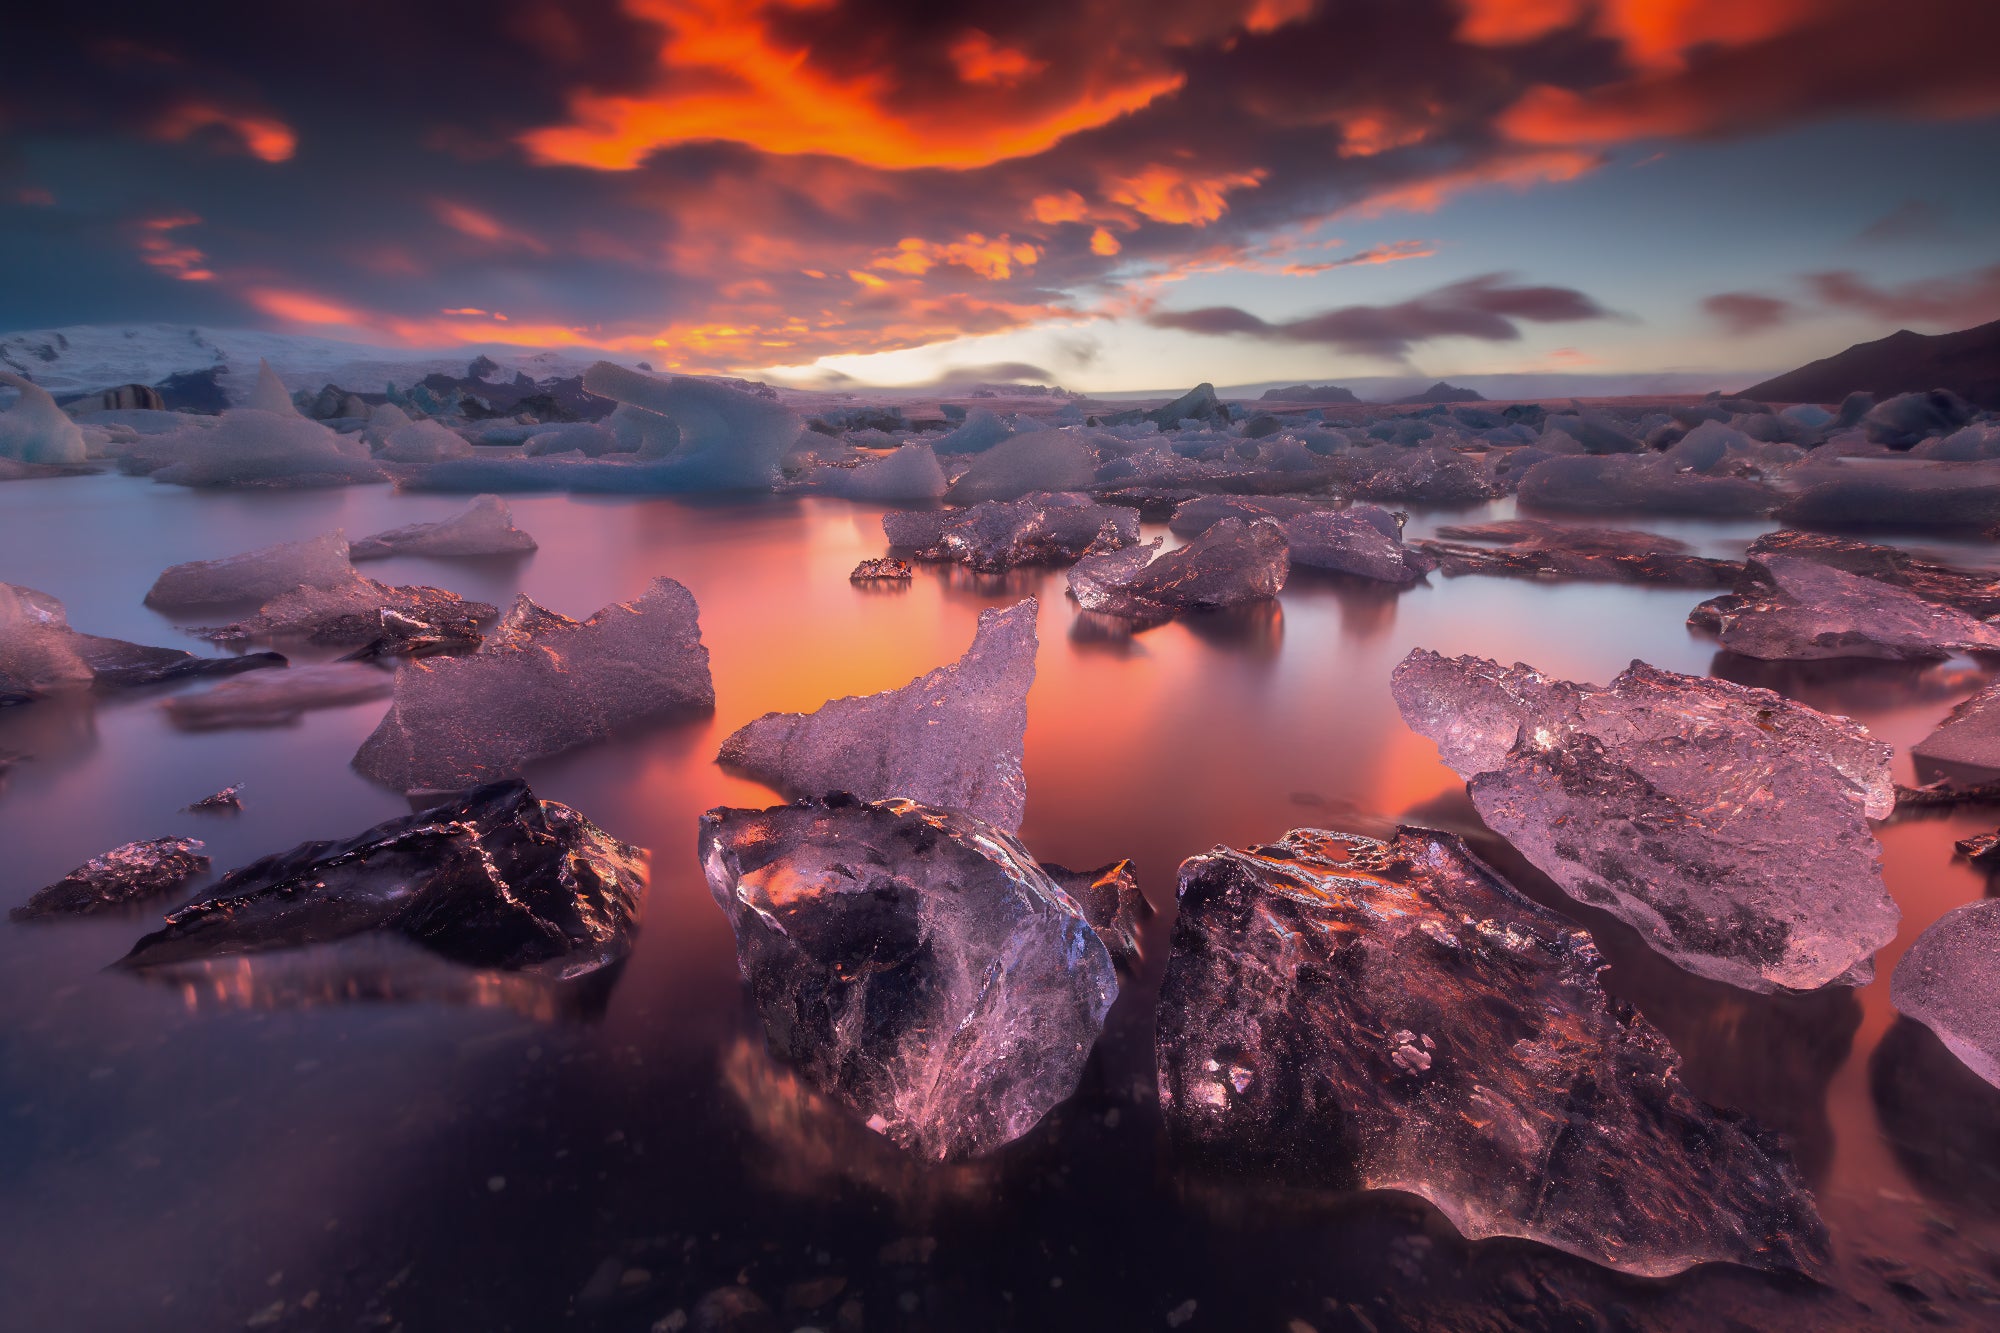 Fire and Ice featured opacity image